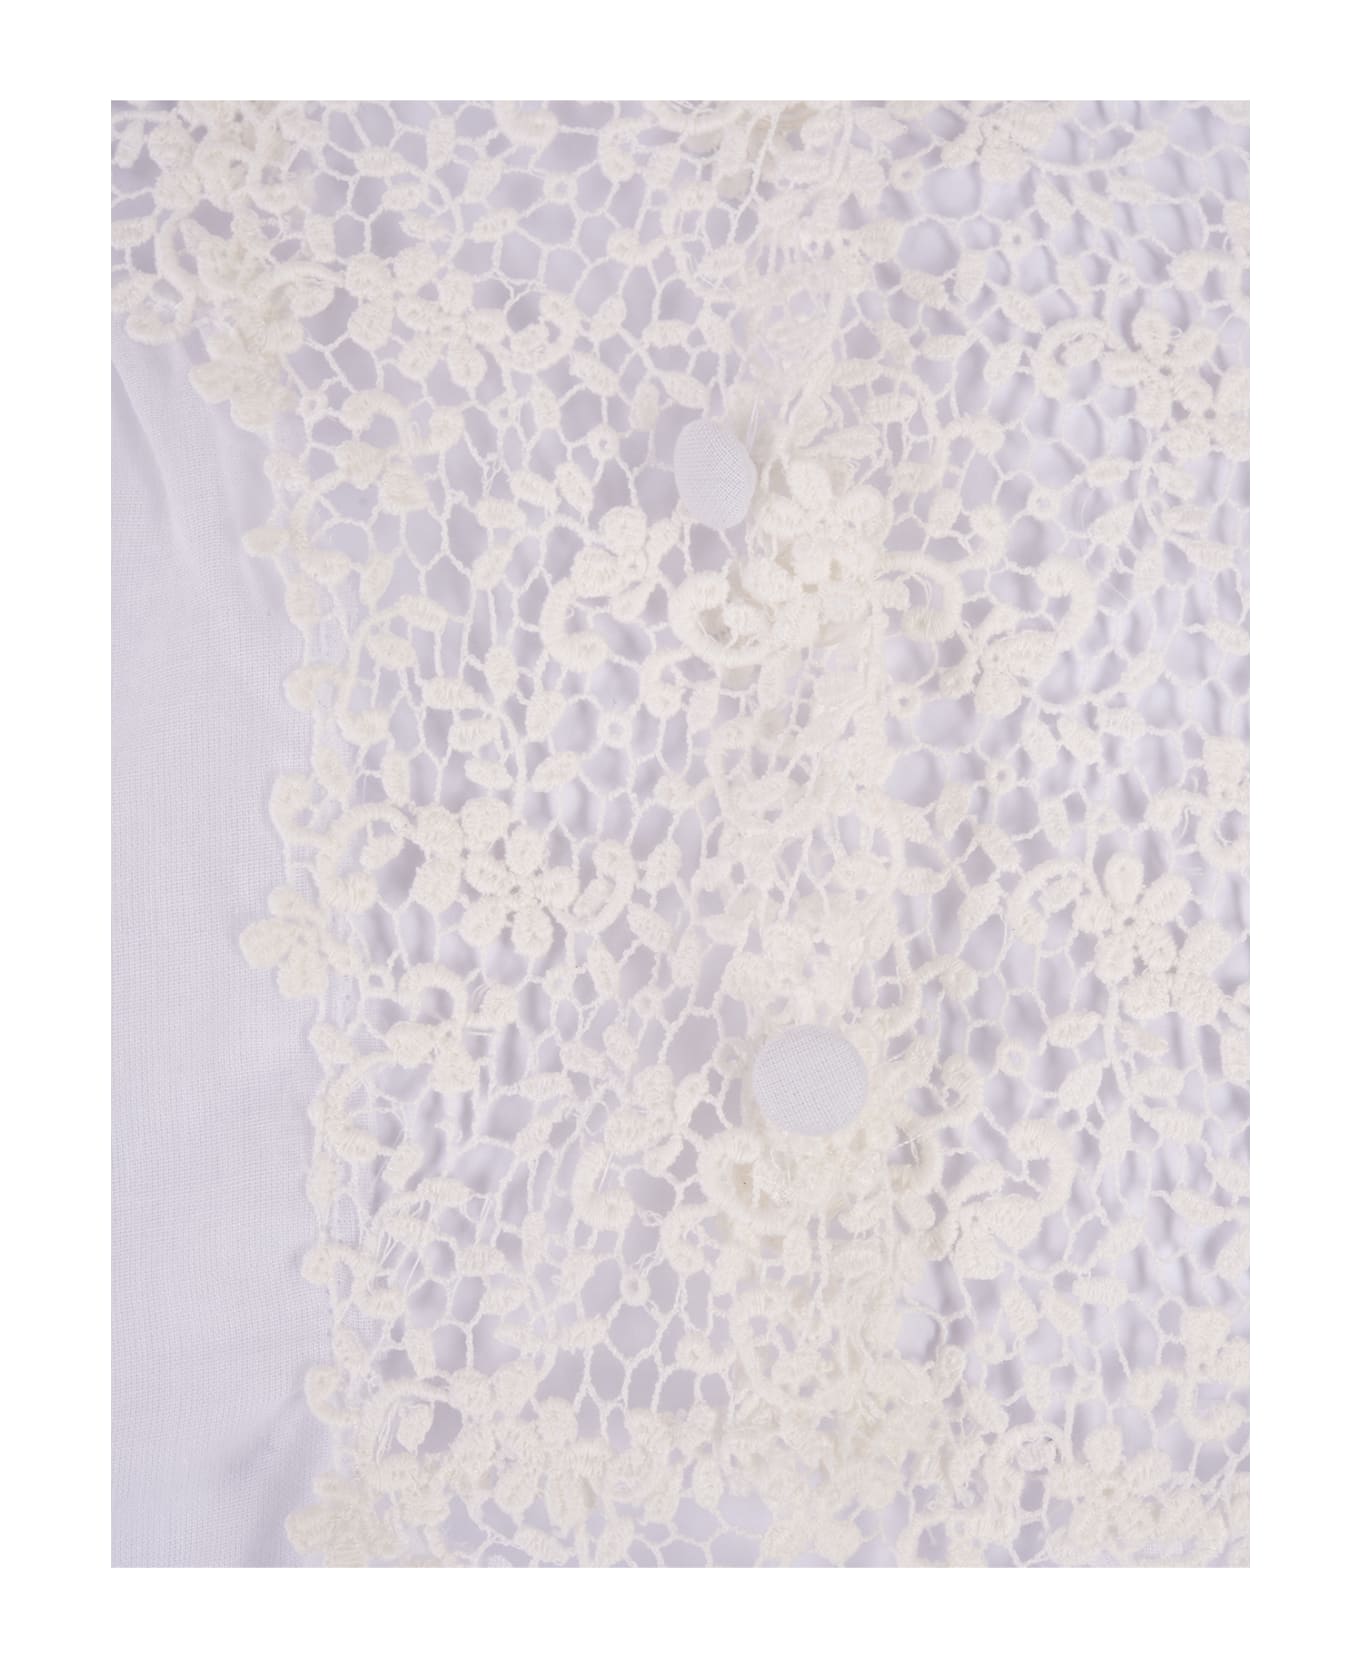 Ermanno Scervino White Blouse With Flower Lace And Cut-out - White ブラウス